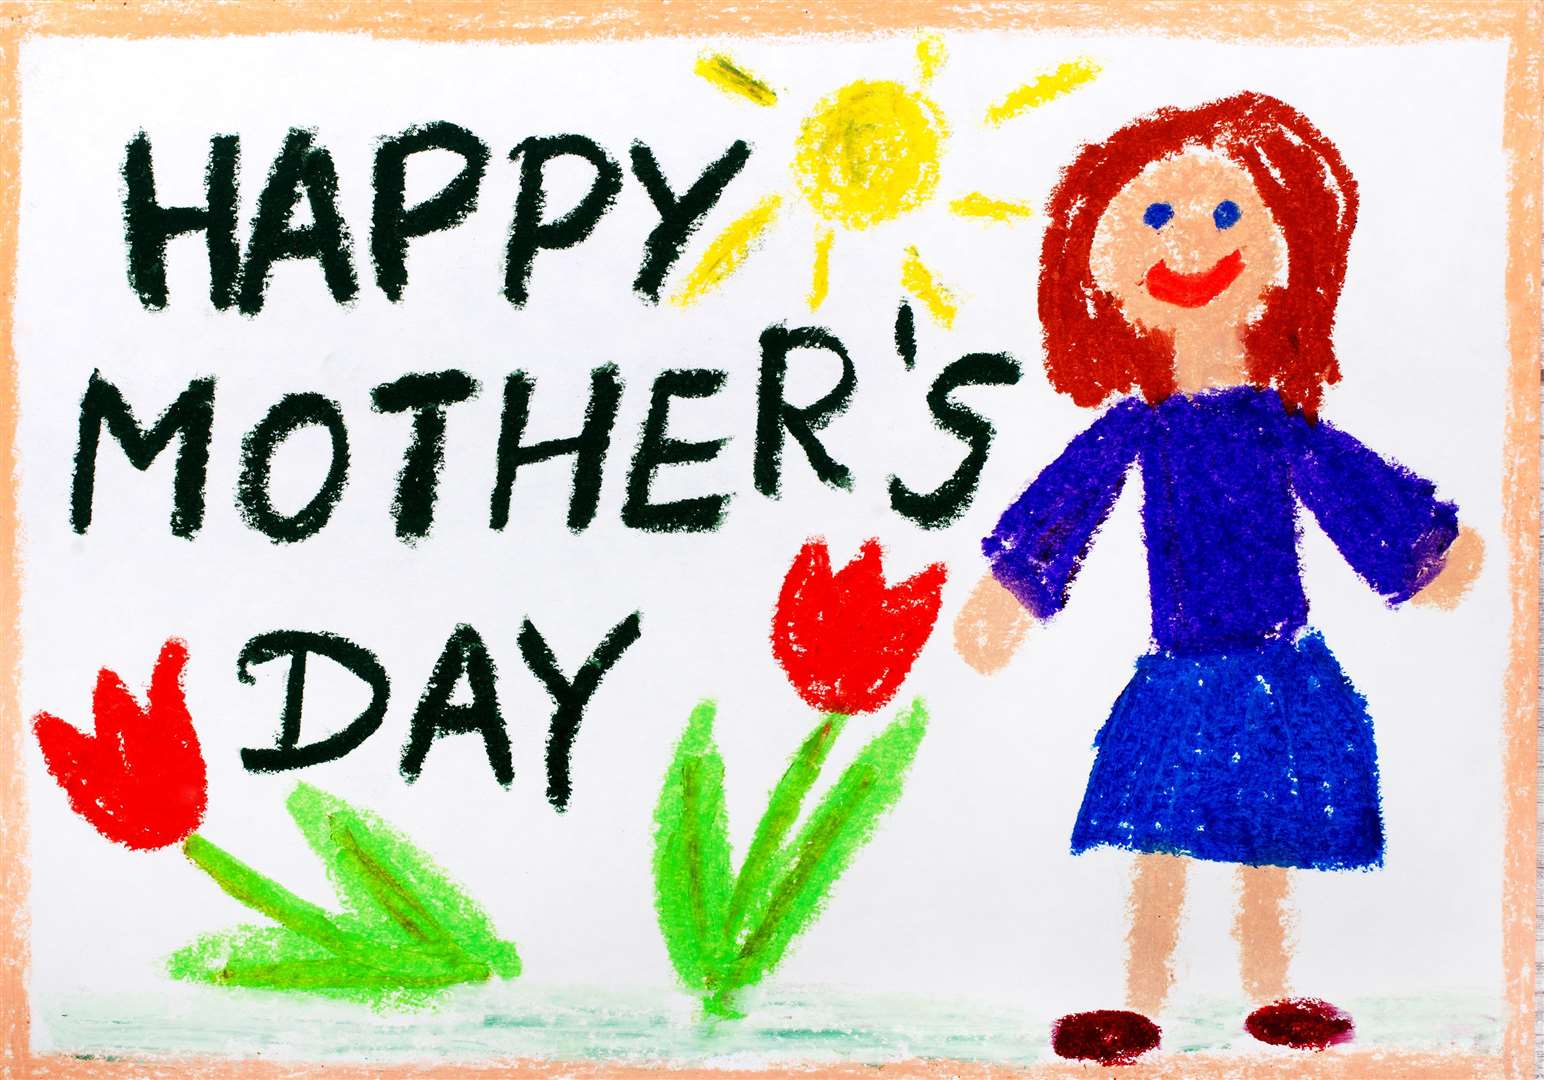 This year Mother's Day is on Sunday, March 31